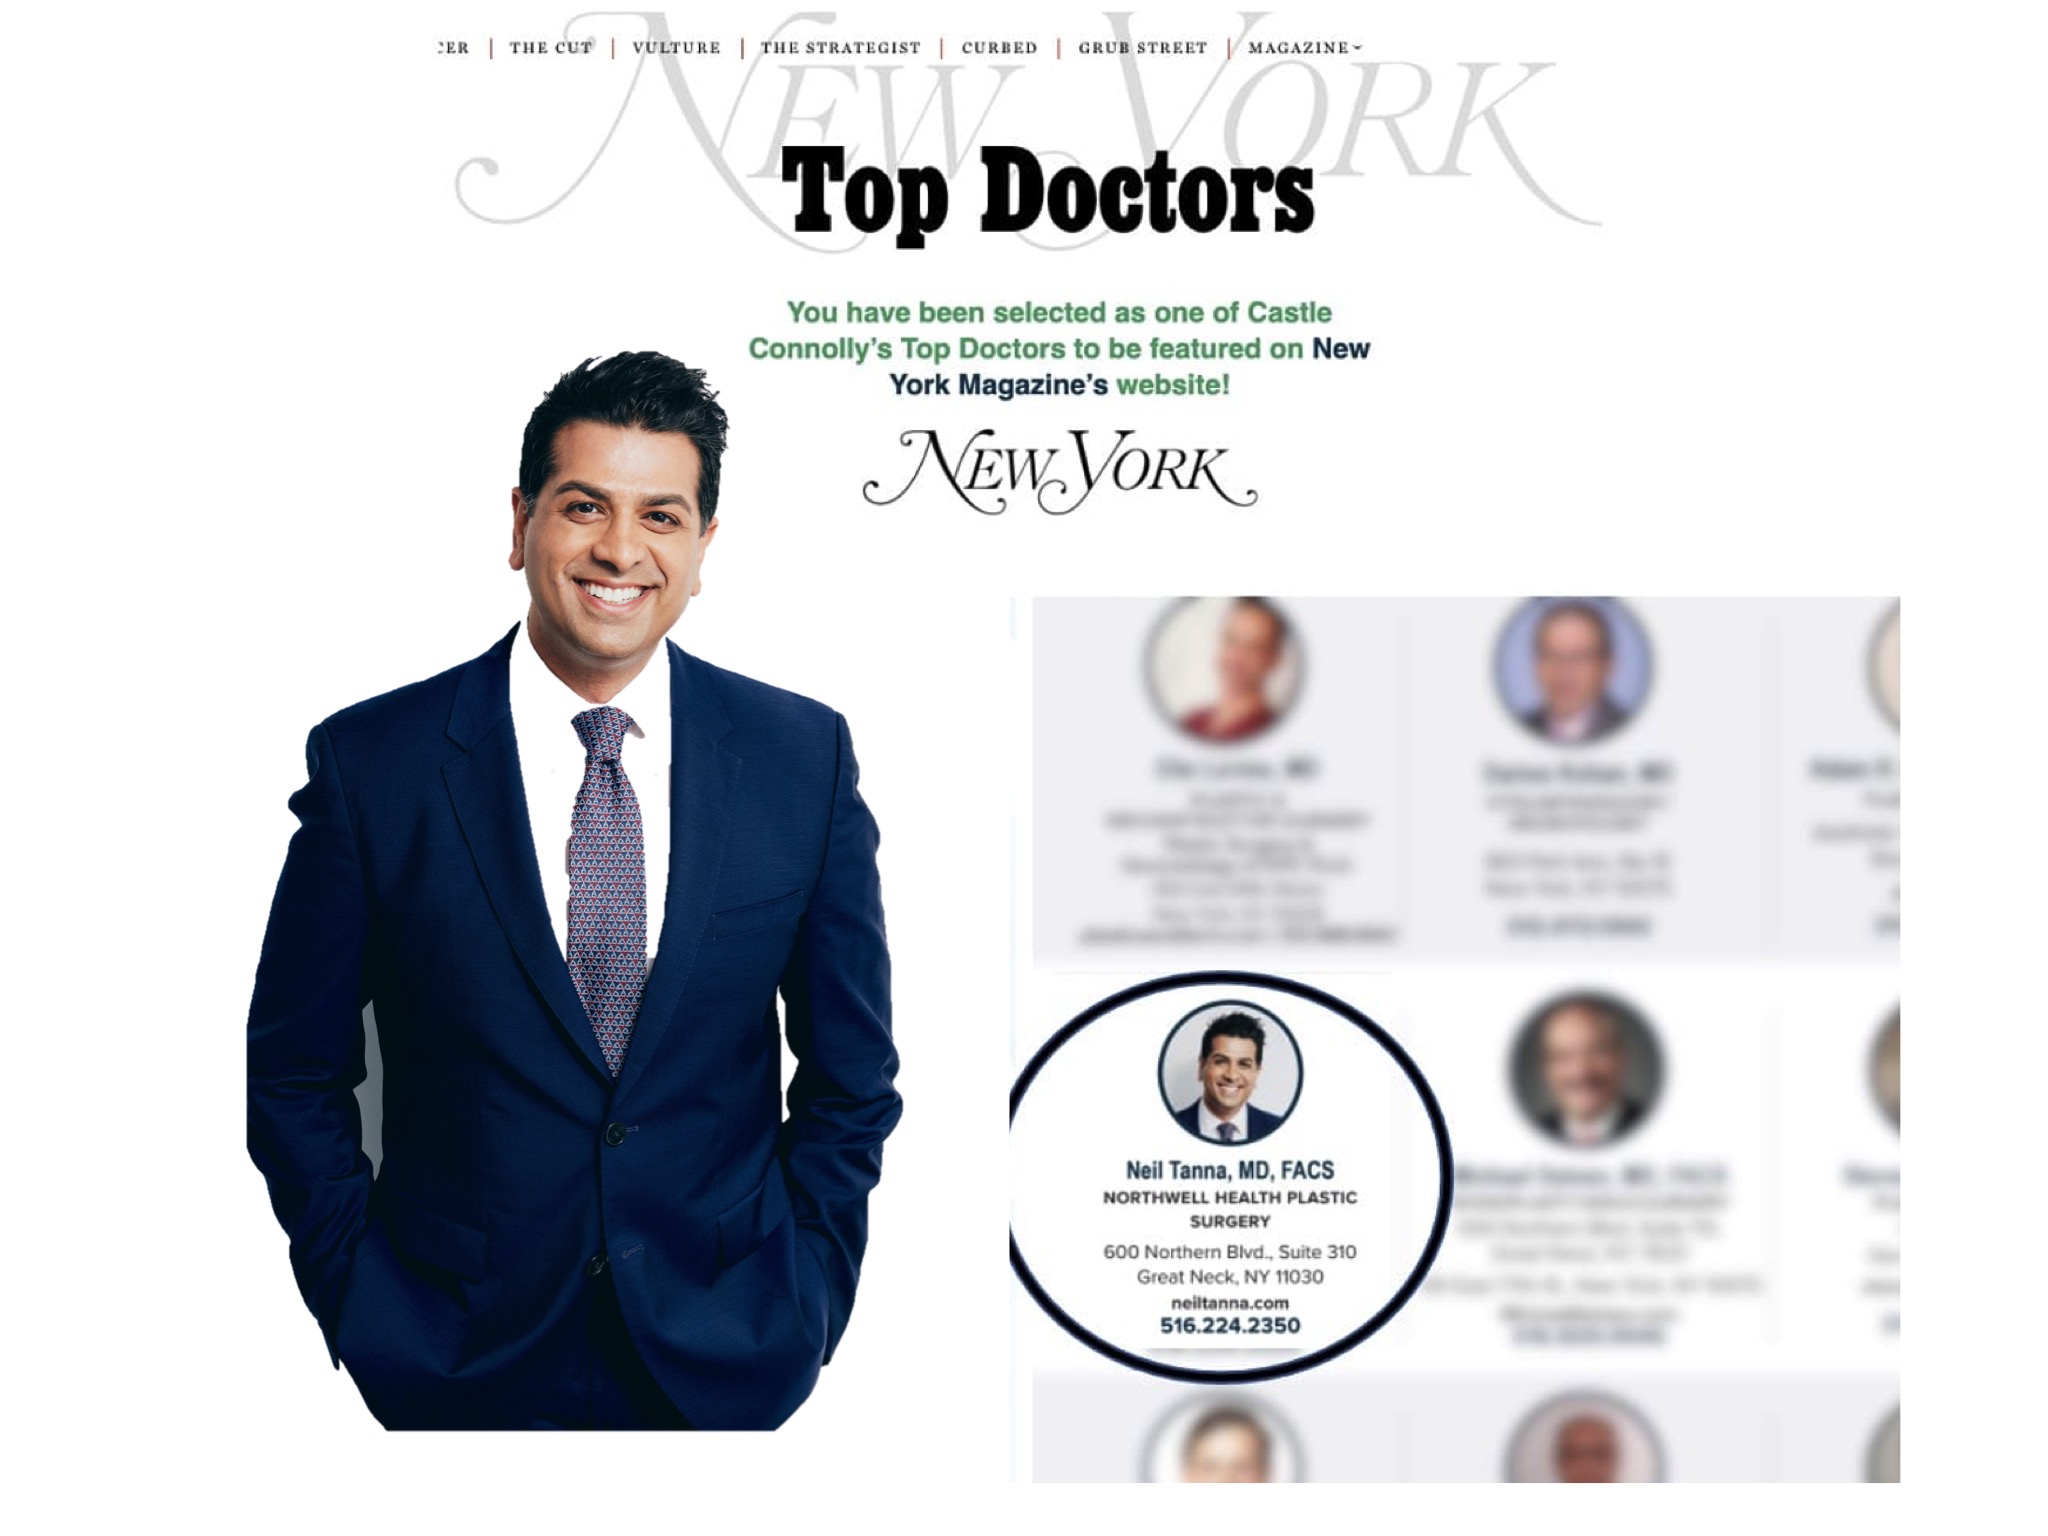 Dr. Tanna Featured on Top Doctors